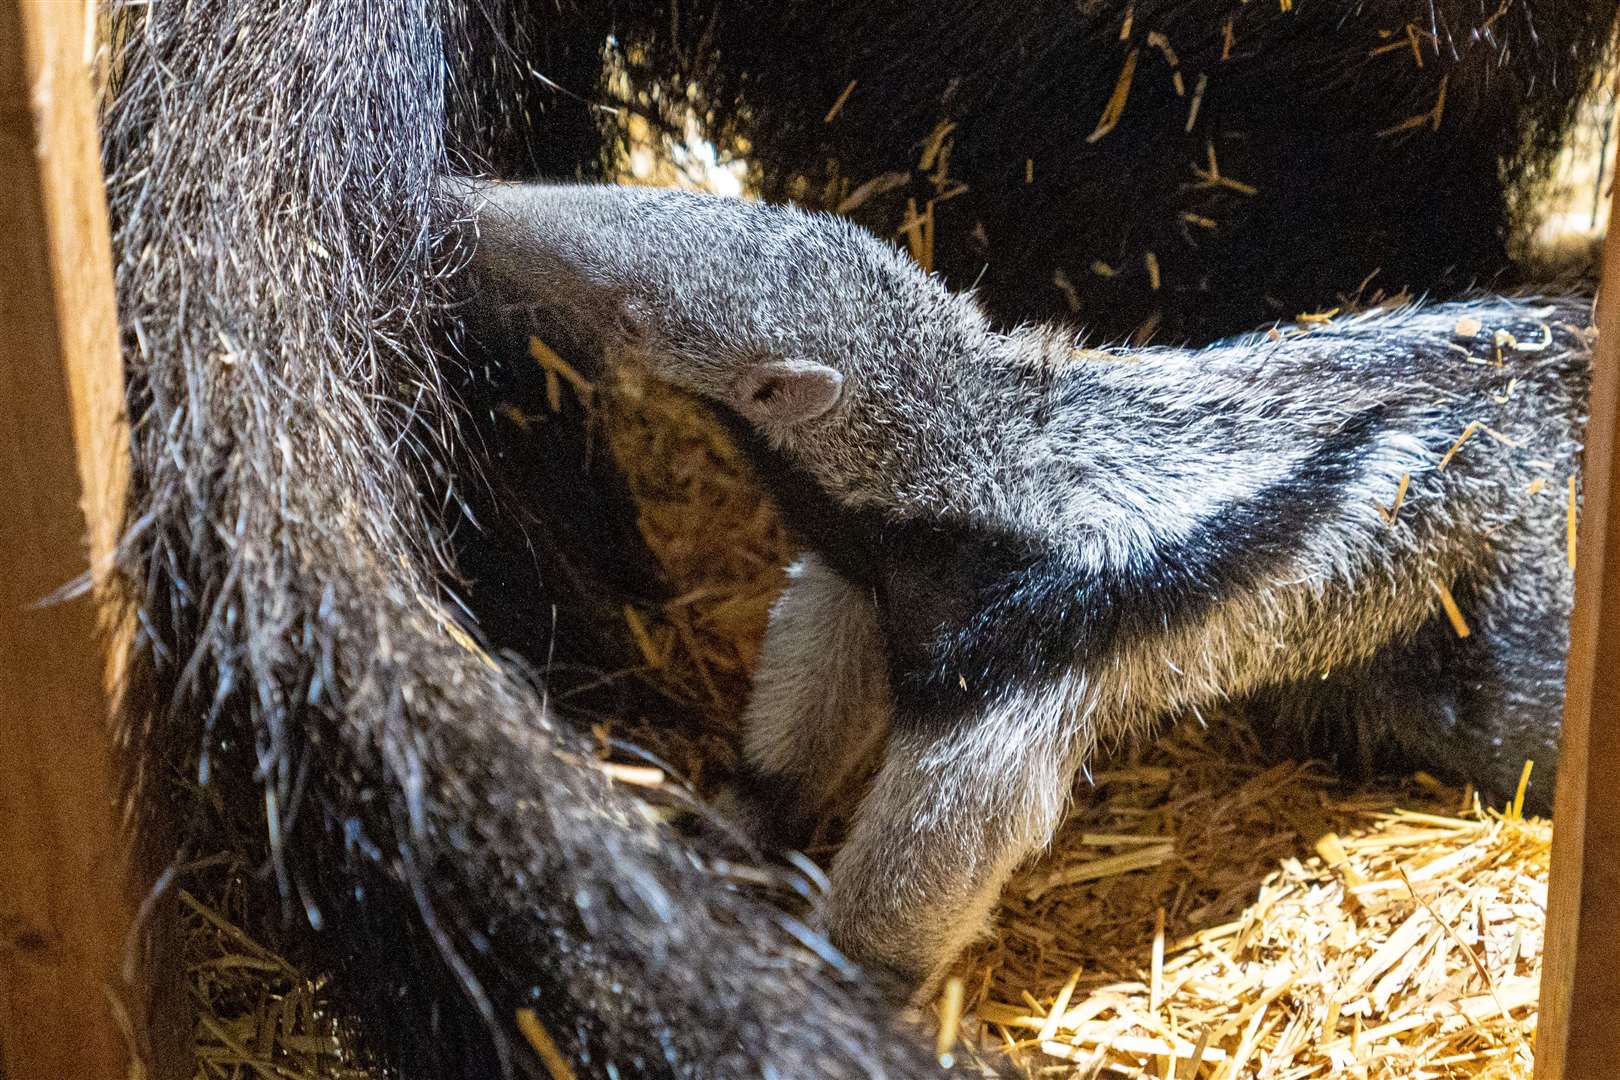 The anteater pup was born on March 12 (Chester Zoo)